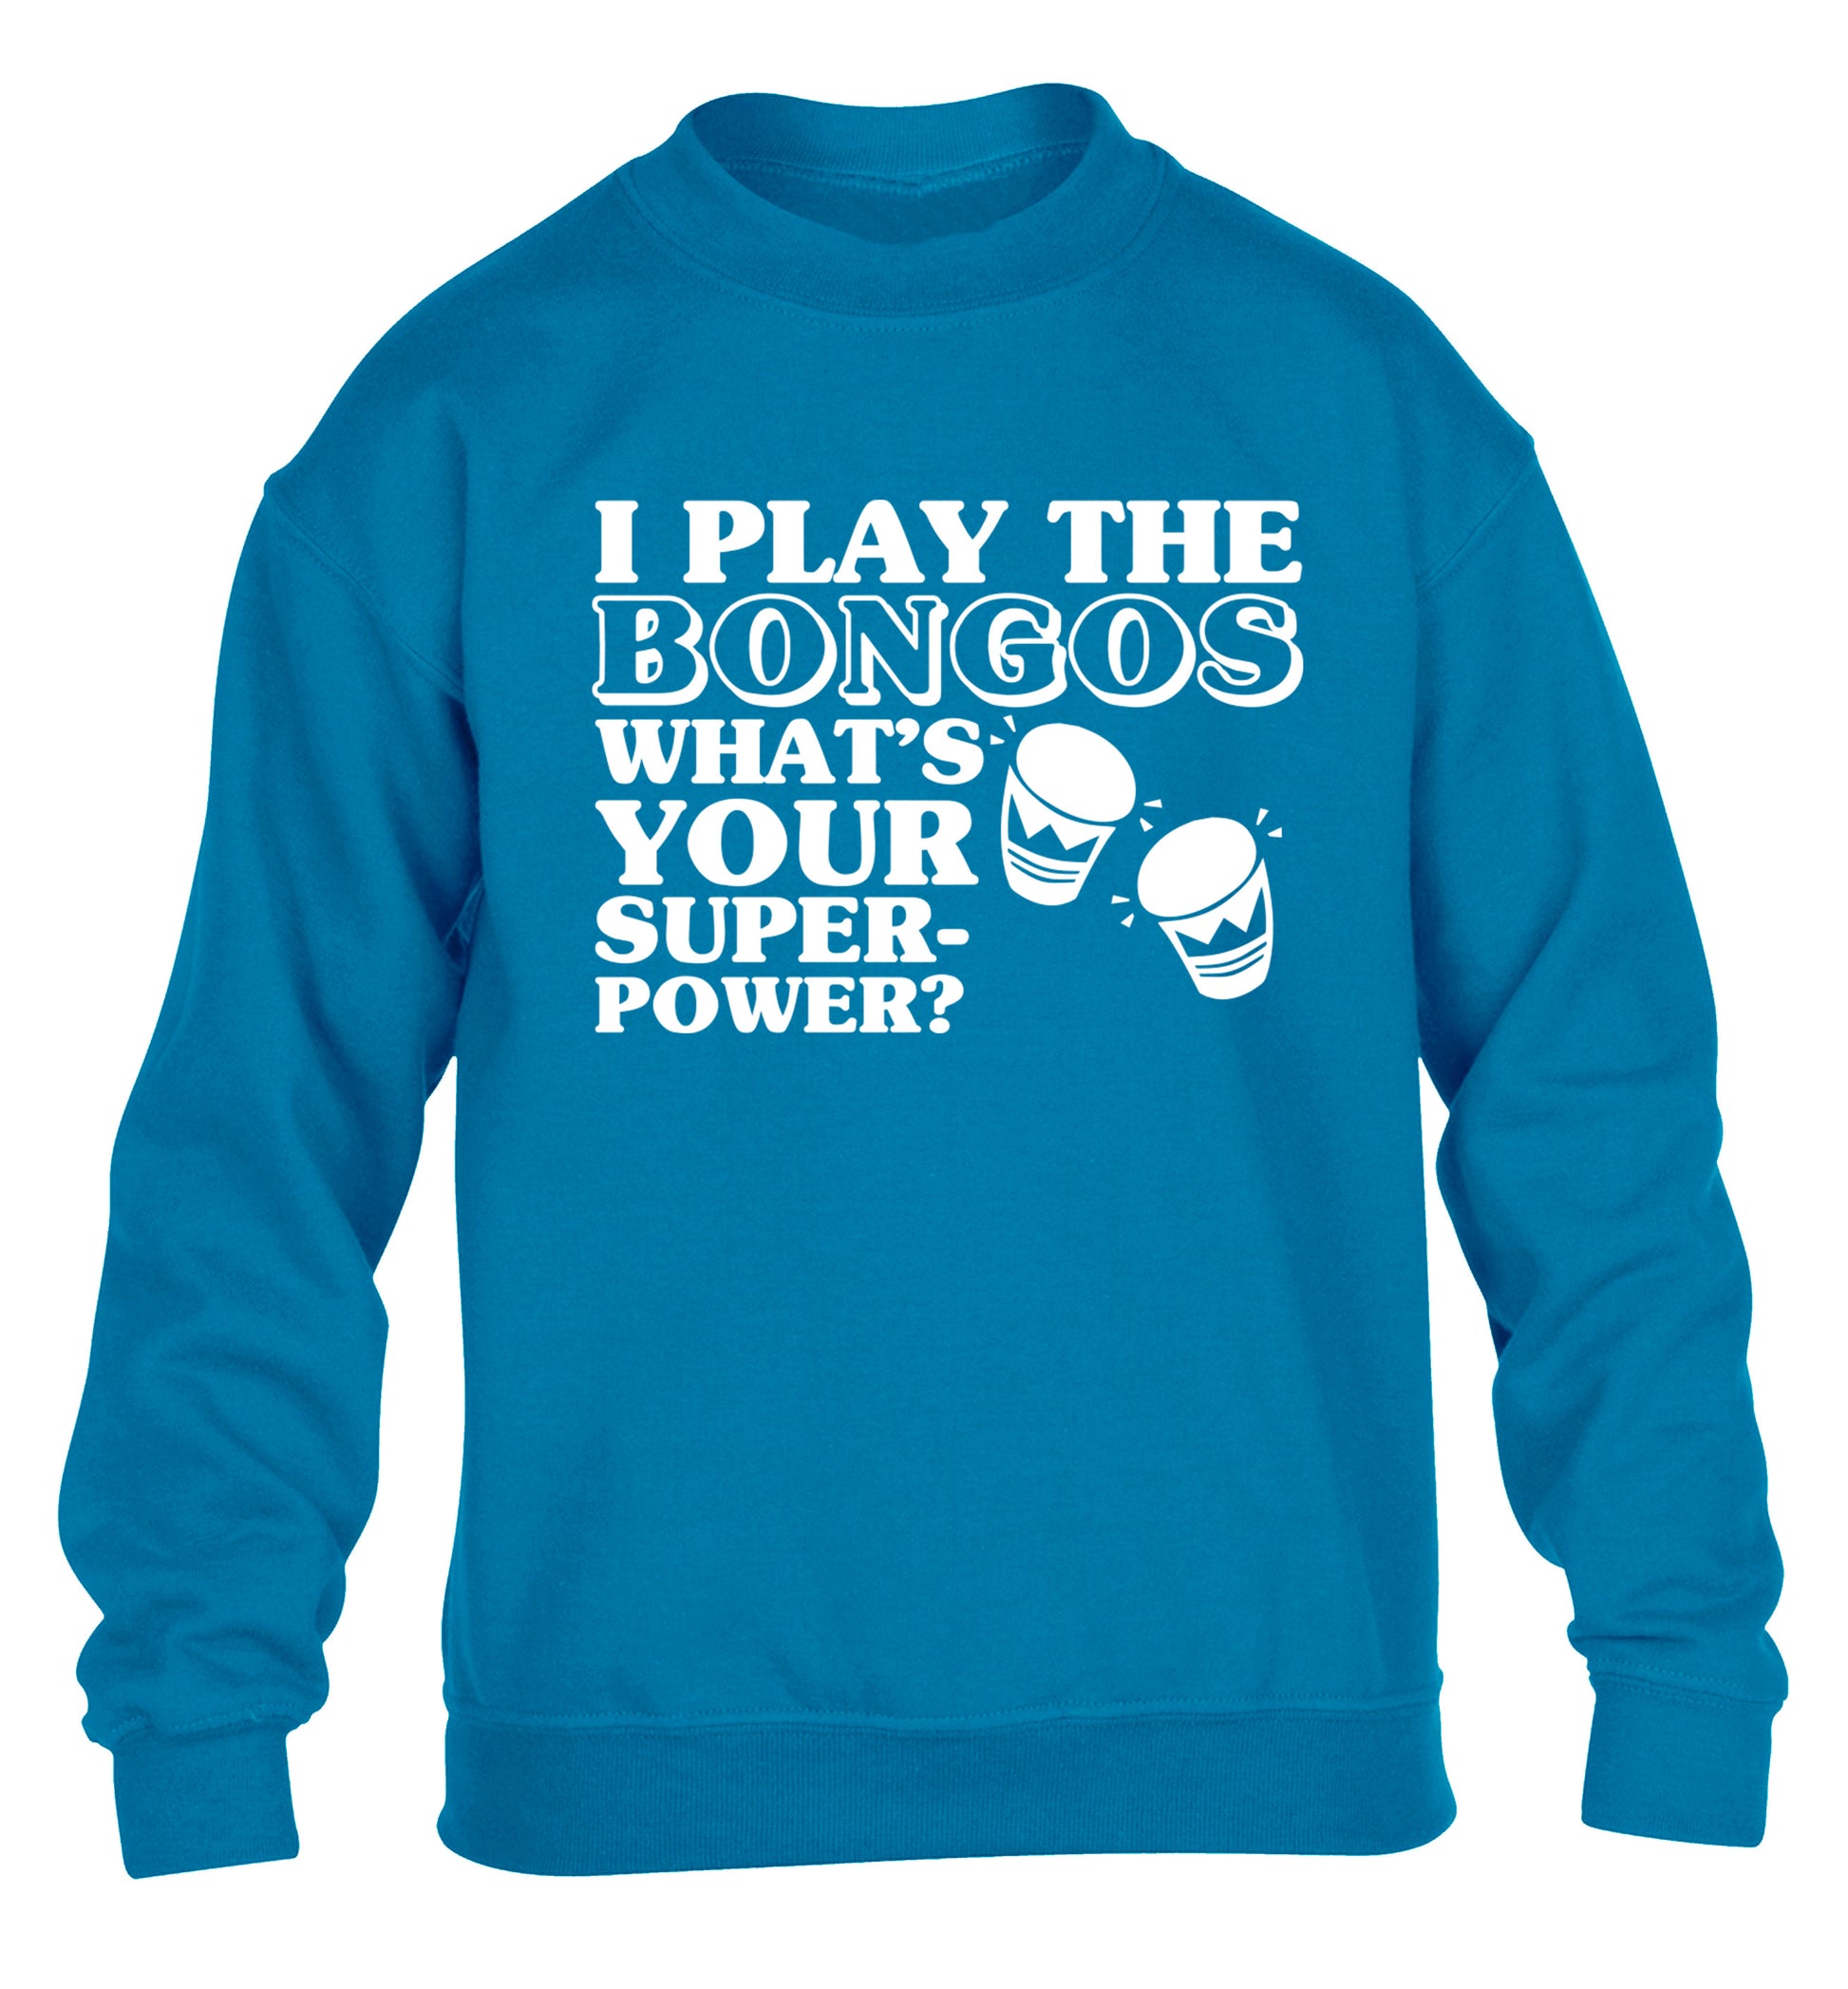 I play the bongos what's your superpower? children's blue sweater 12-14 Years